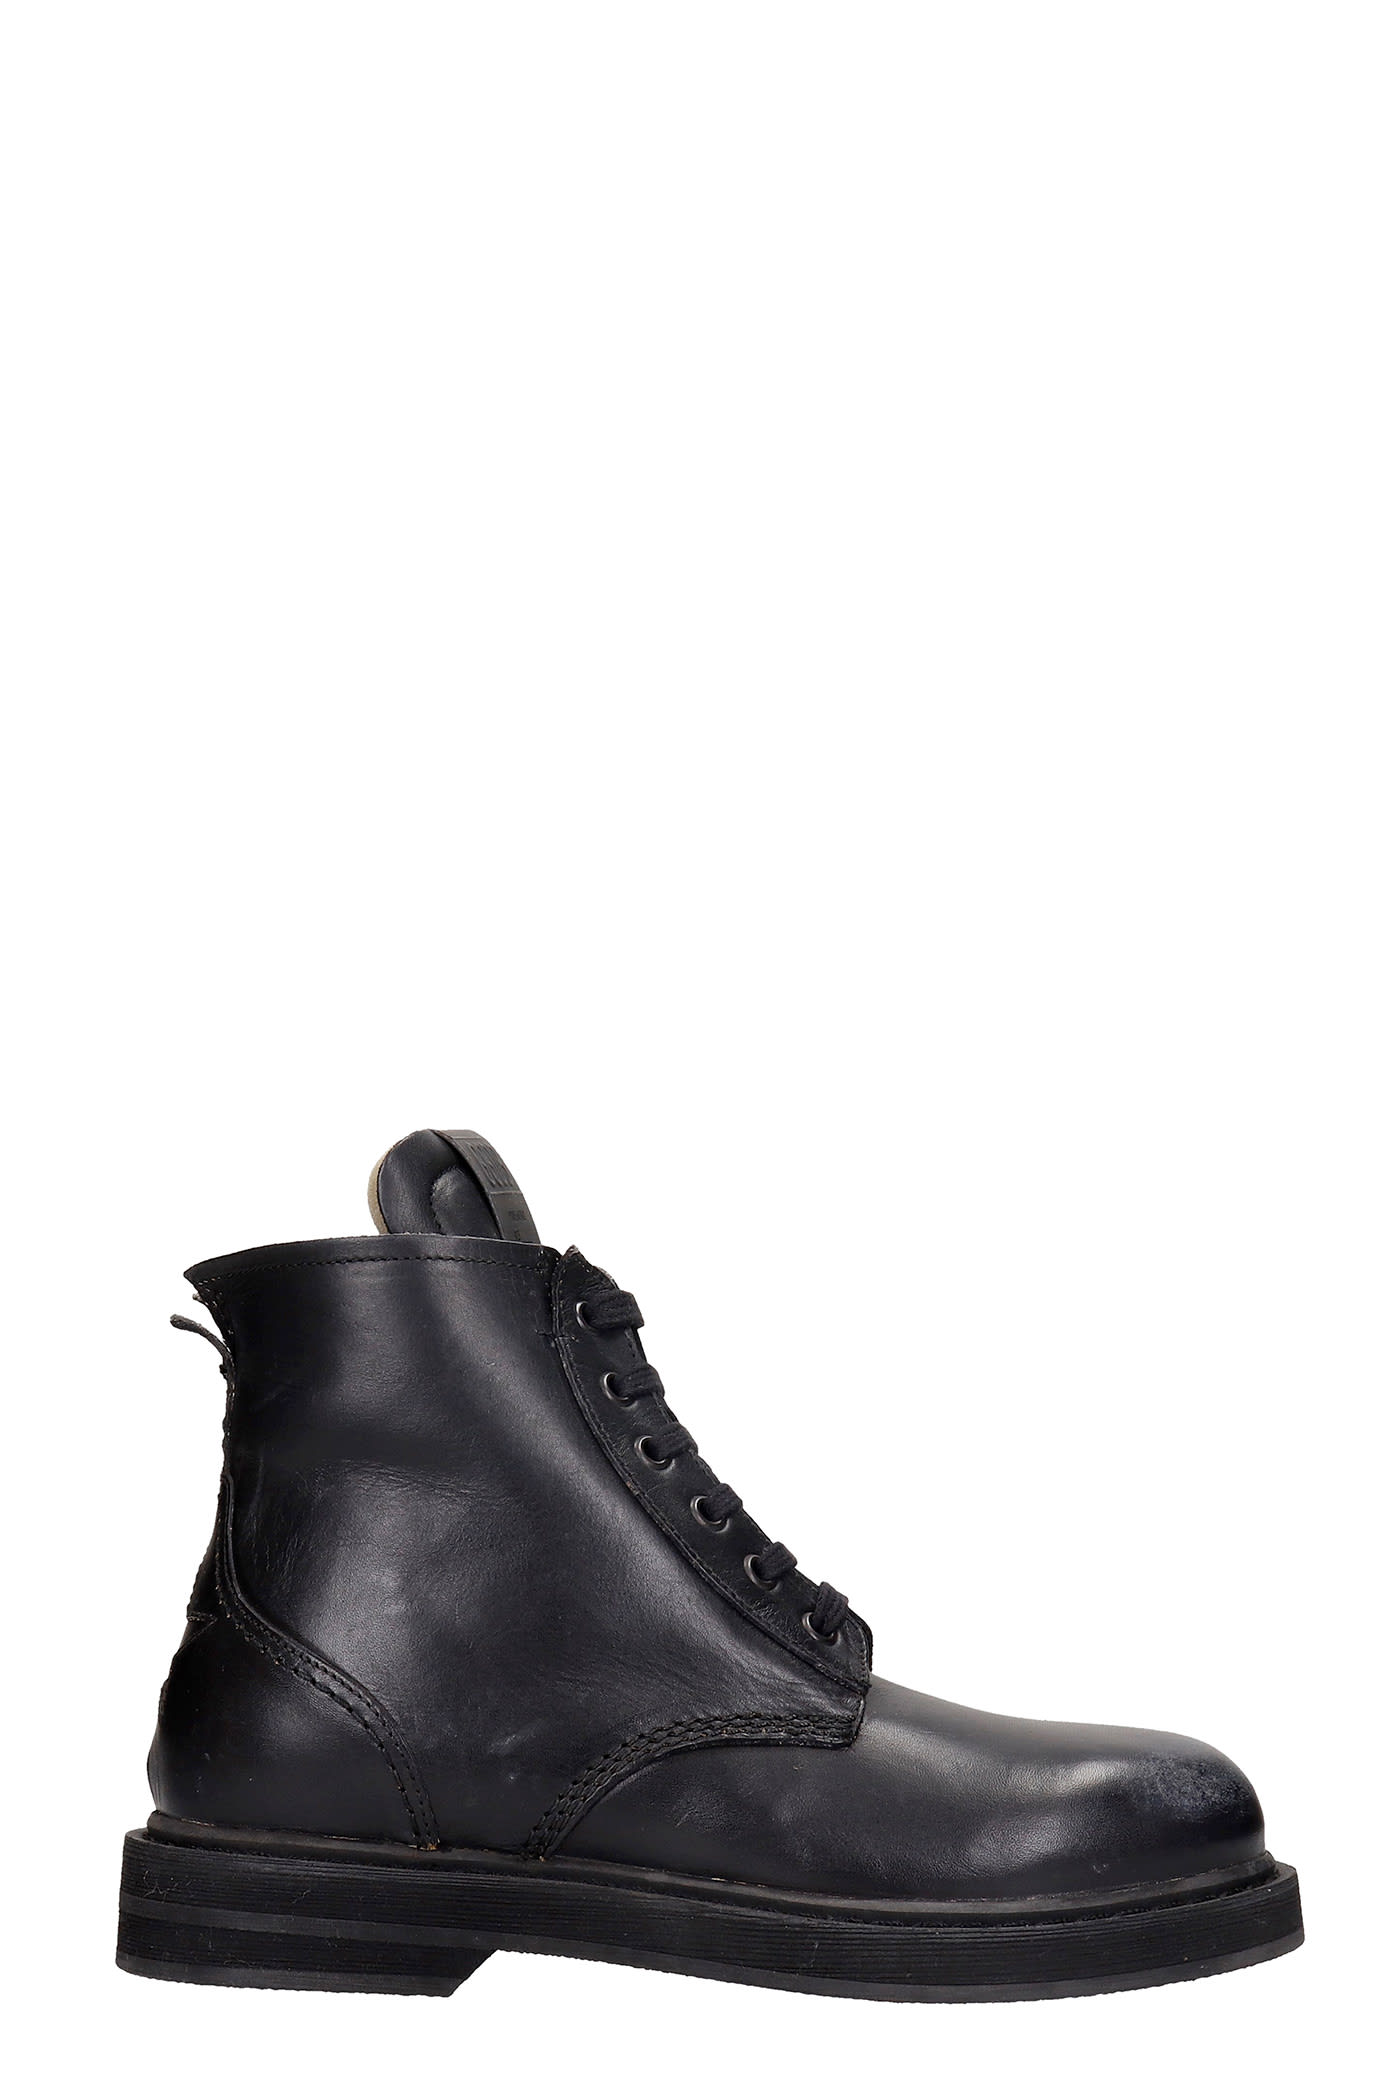 Buy Golden Goose Ele Combat Boots In Black Leather online, shop Golden Goose shoes with free shipping